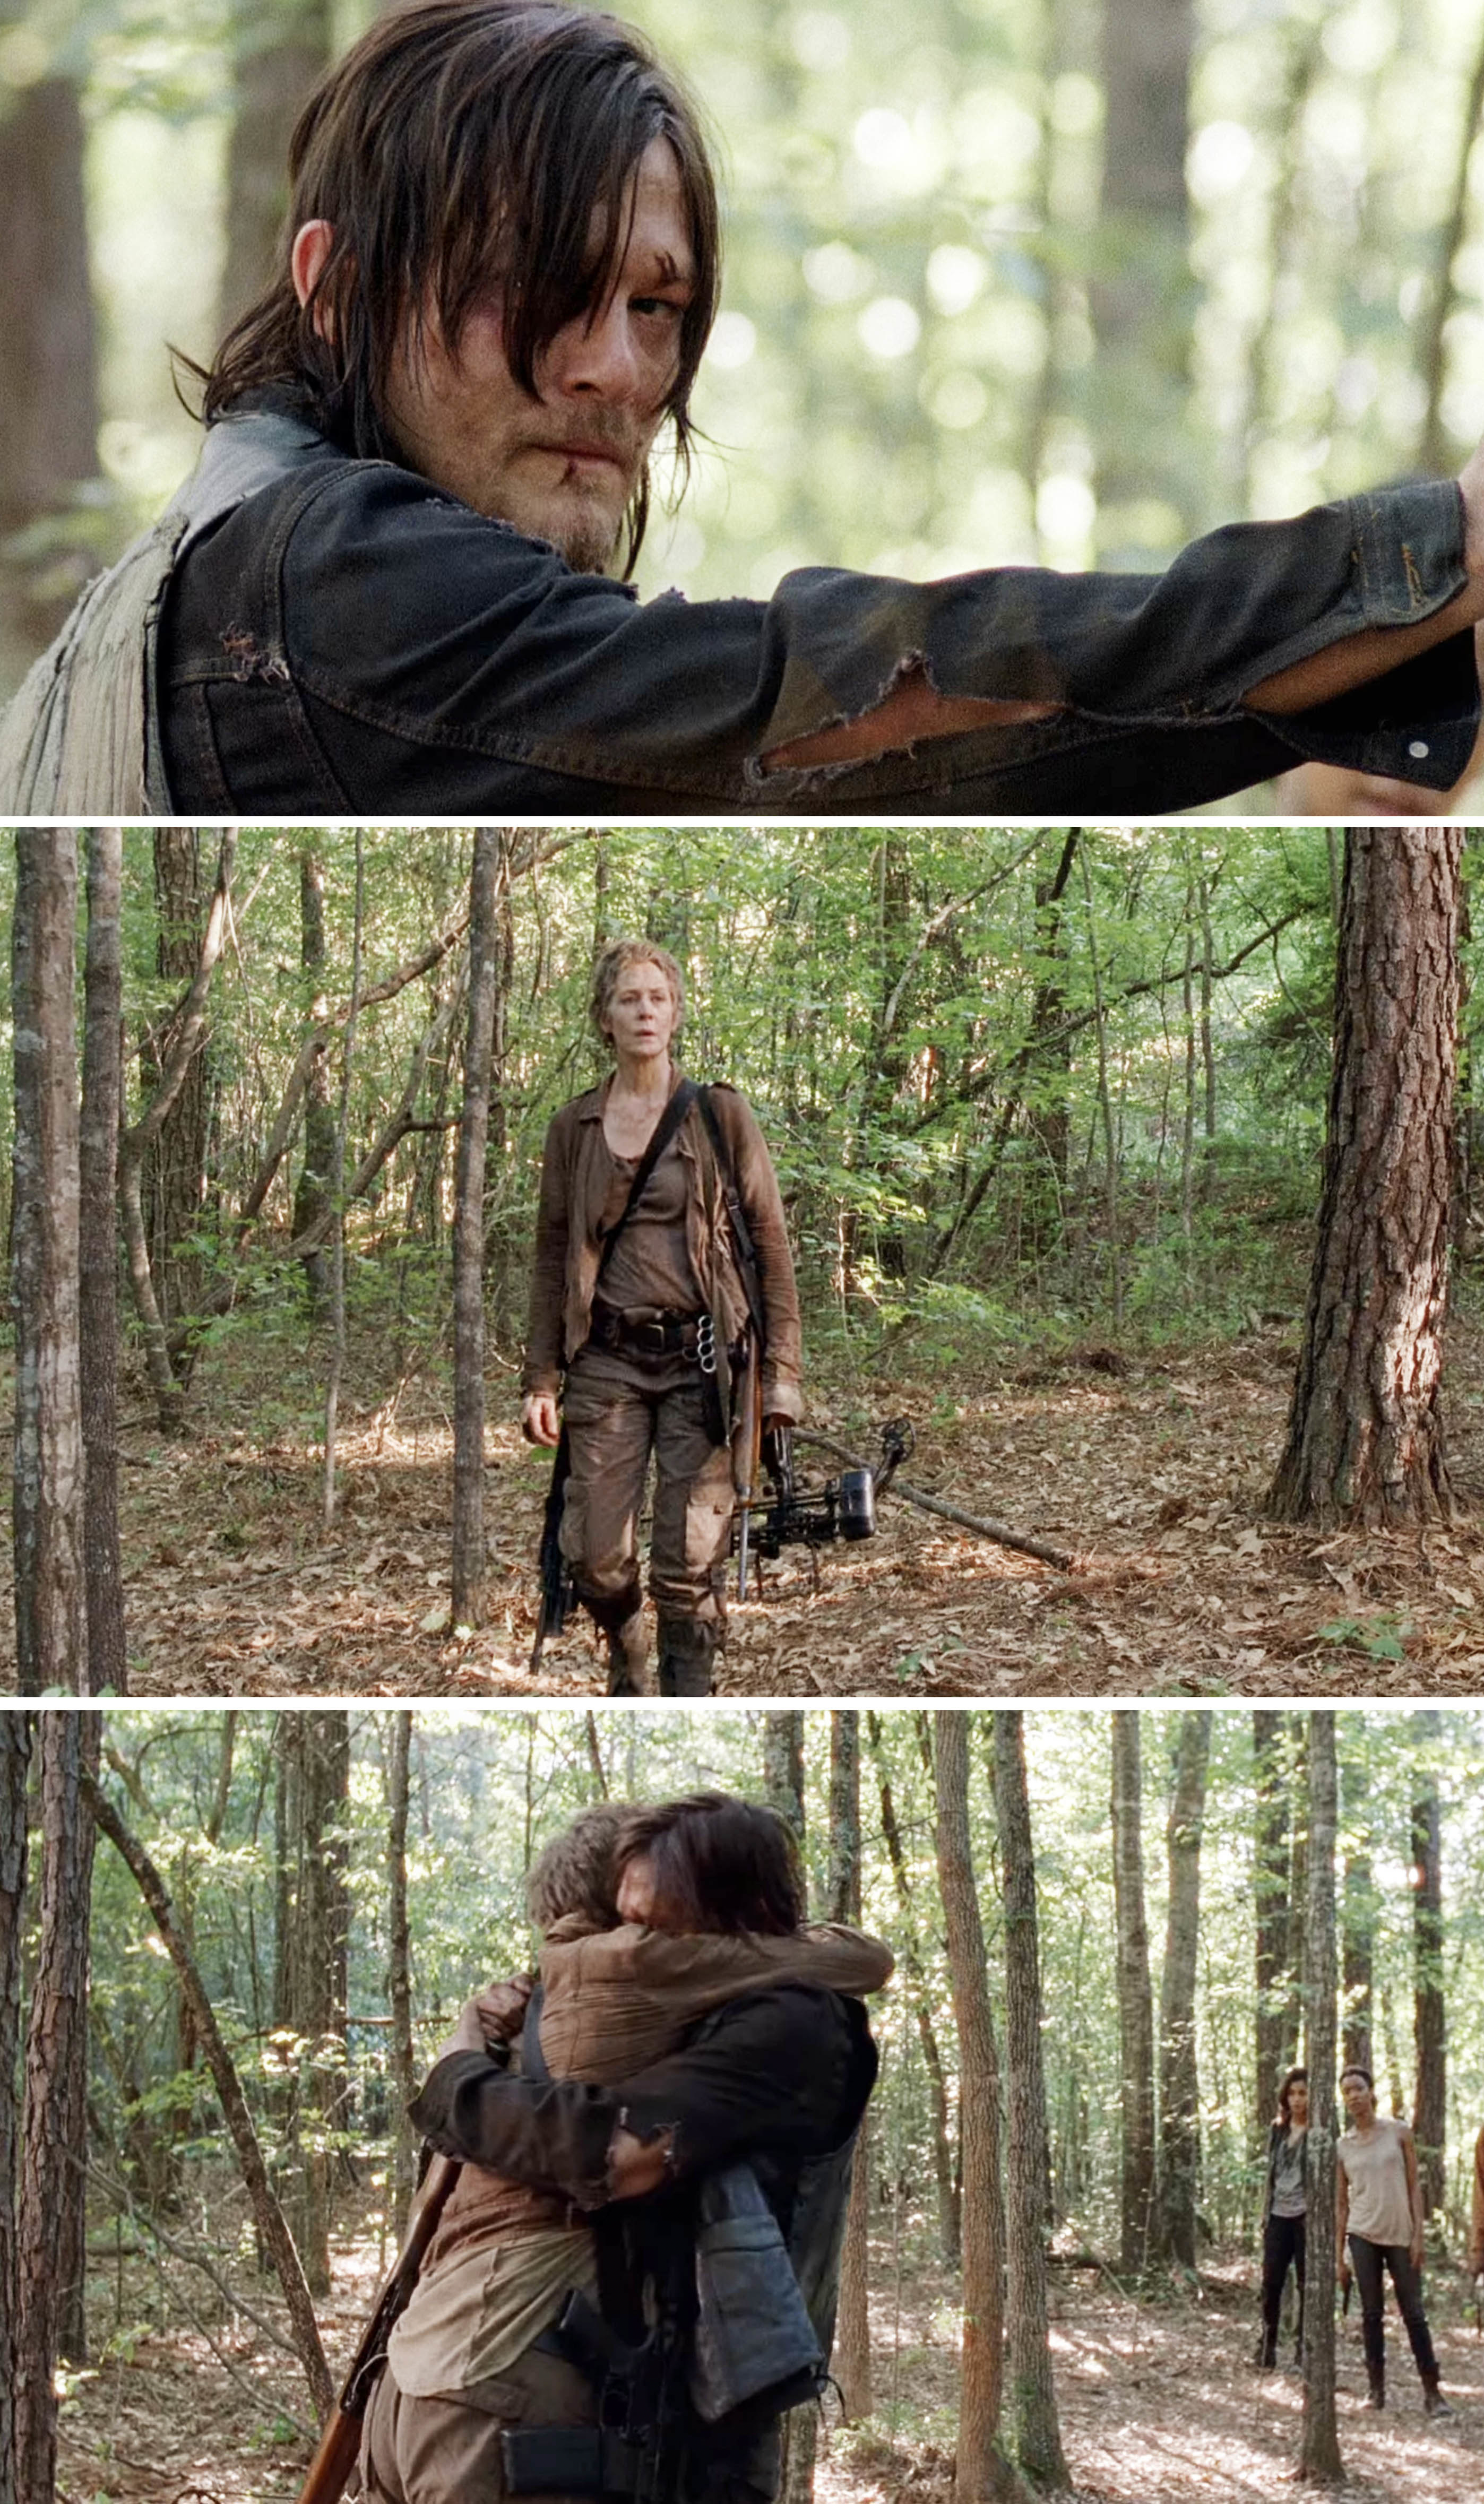 Daryl and Carol embracing in the forest